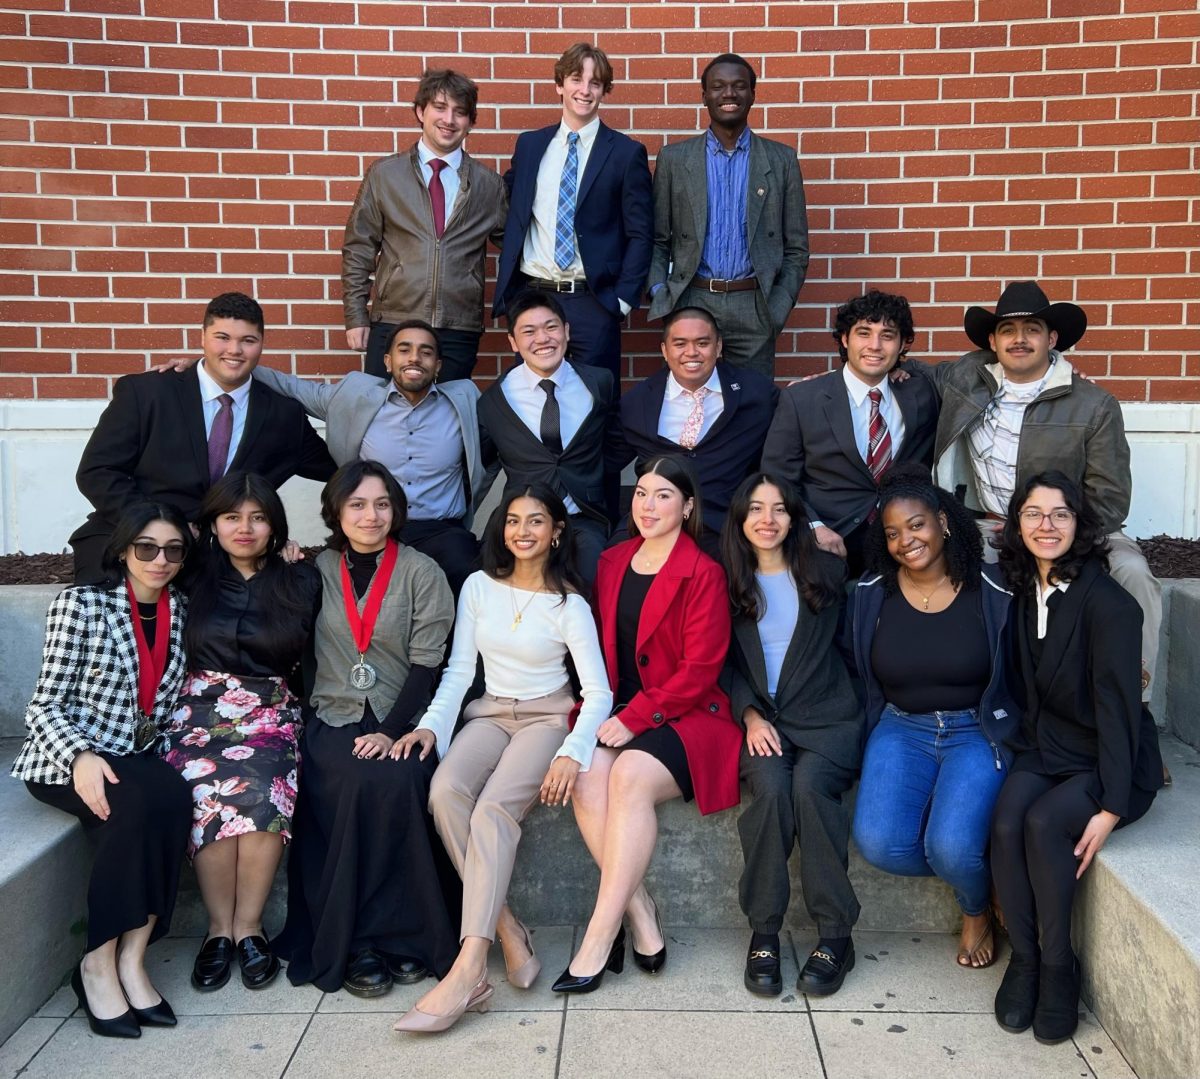 Members of the El Camino College Forensics team pose for a photo at Mt. San Antonio College, where the Pacific Southwest Collegiate Association Fall Championship Tournament was held on Friday, Dec. 1. The tournament continued until Dec. 3 where the Forensics team placed third overall out of 24 community colleges. (Photo courtesy of Francesca Bishop)